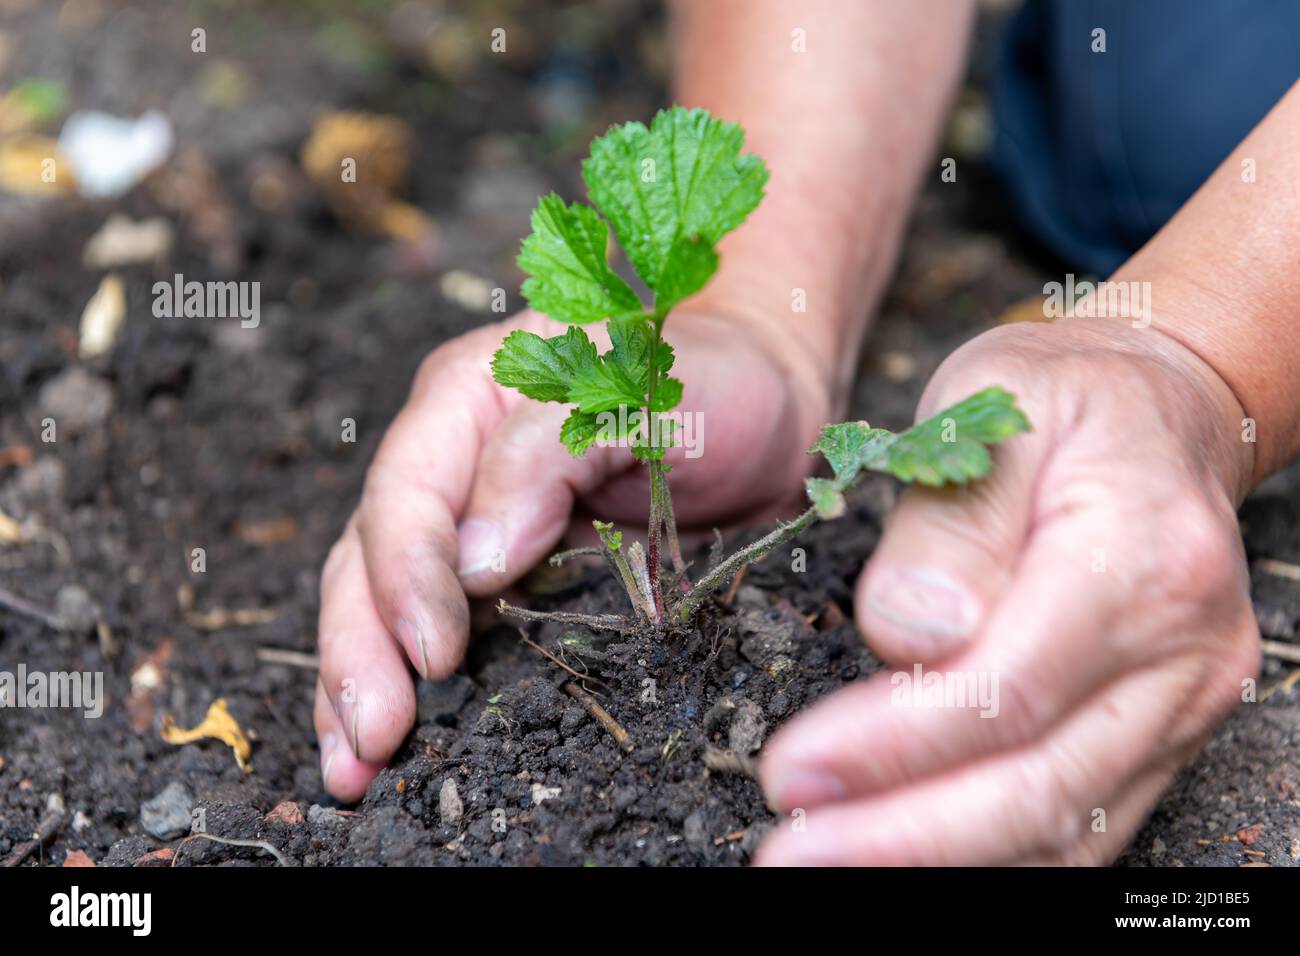 agriculture, background, bio diversity, care, concept, cultivate, development, dirt, earth, eco, ecology, environment, environmental, farm, farming, f Stock Photo